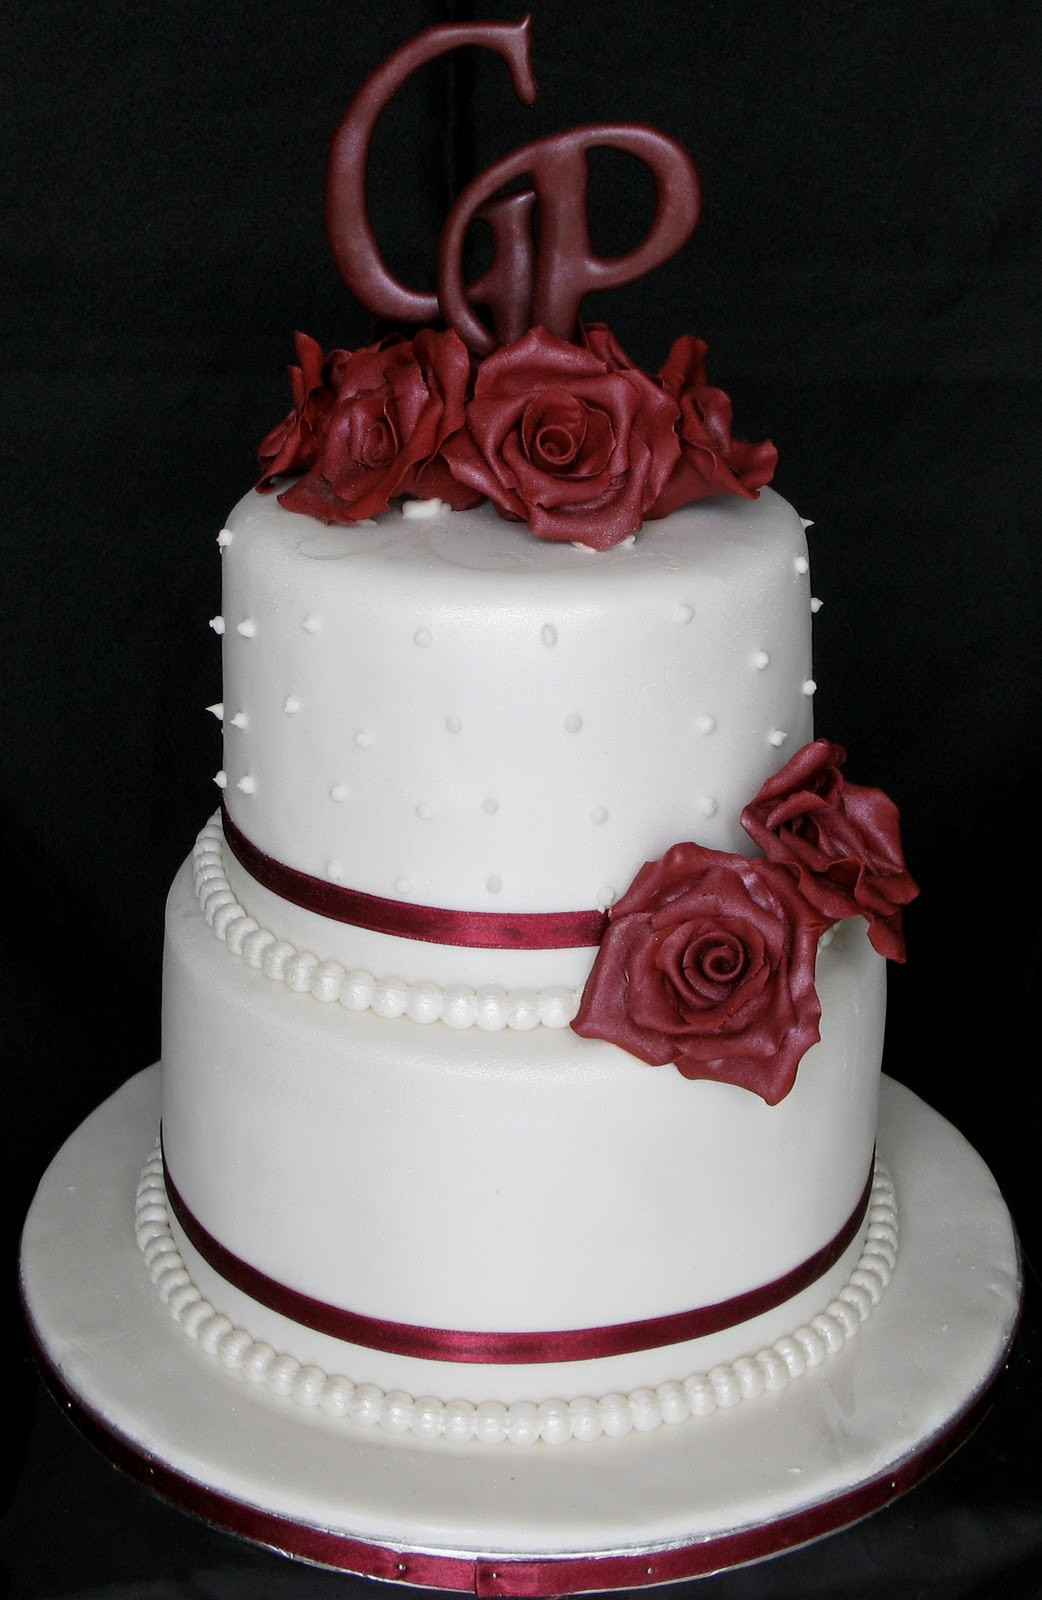 2 Tier Wedding Cakes
 Sugarcraft by Soni Two Layer Wedding Cake with Roses